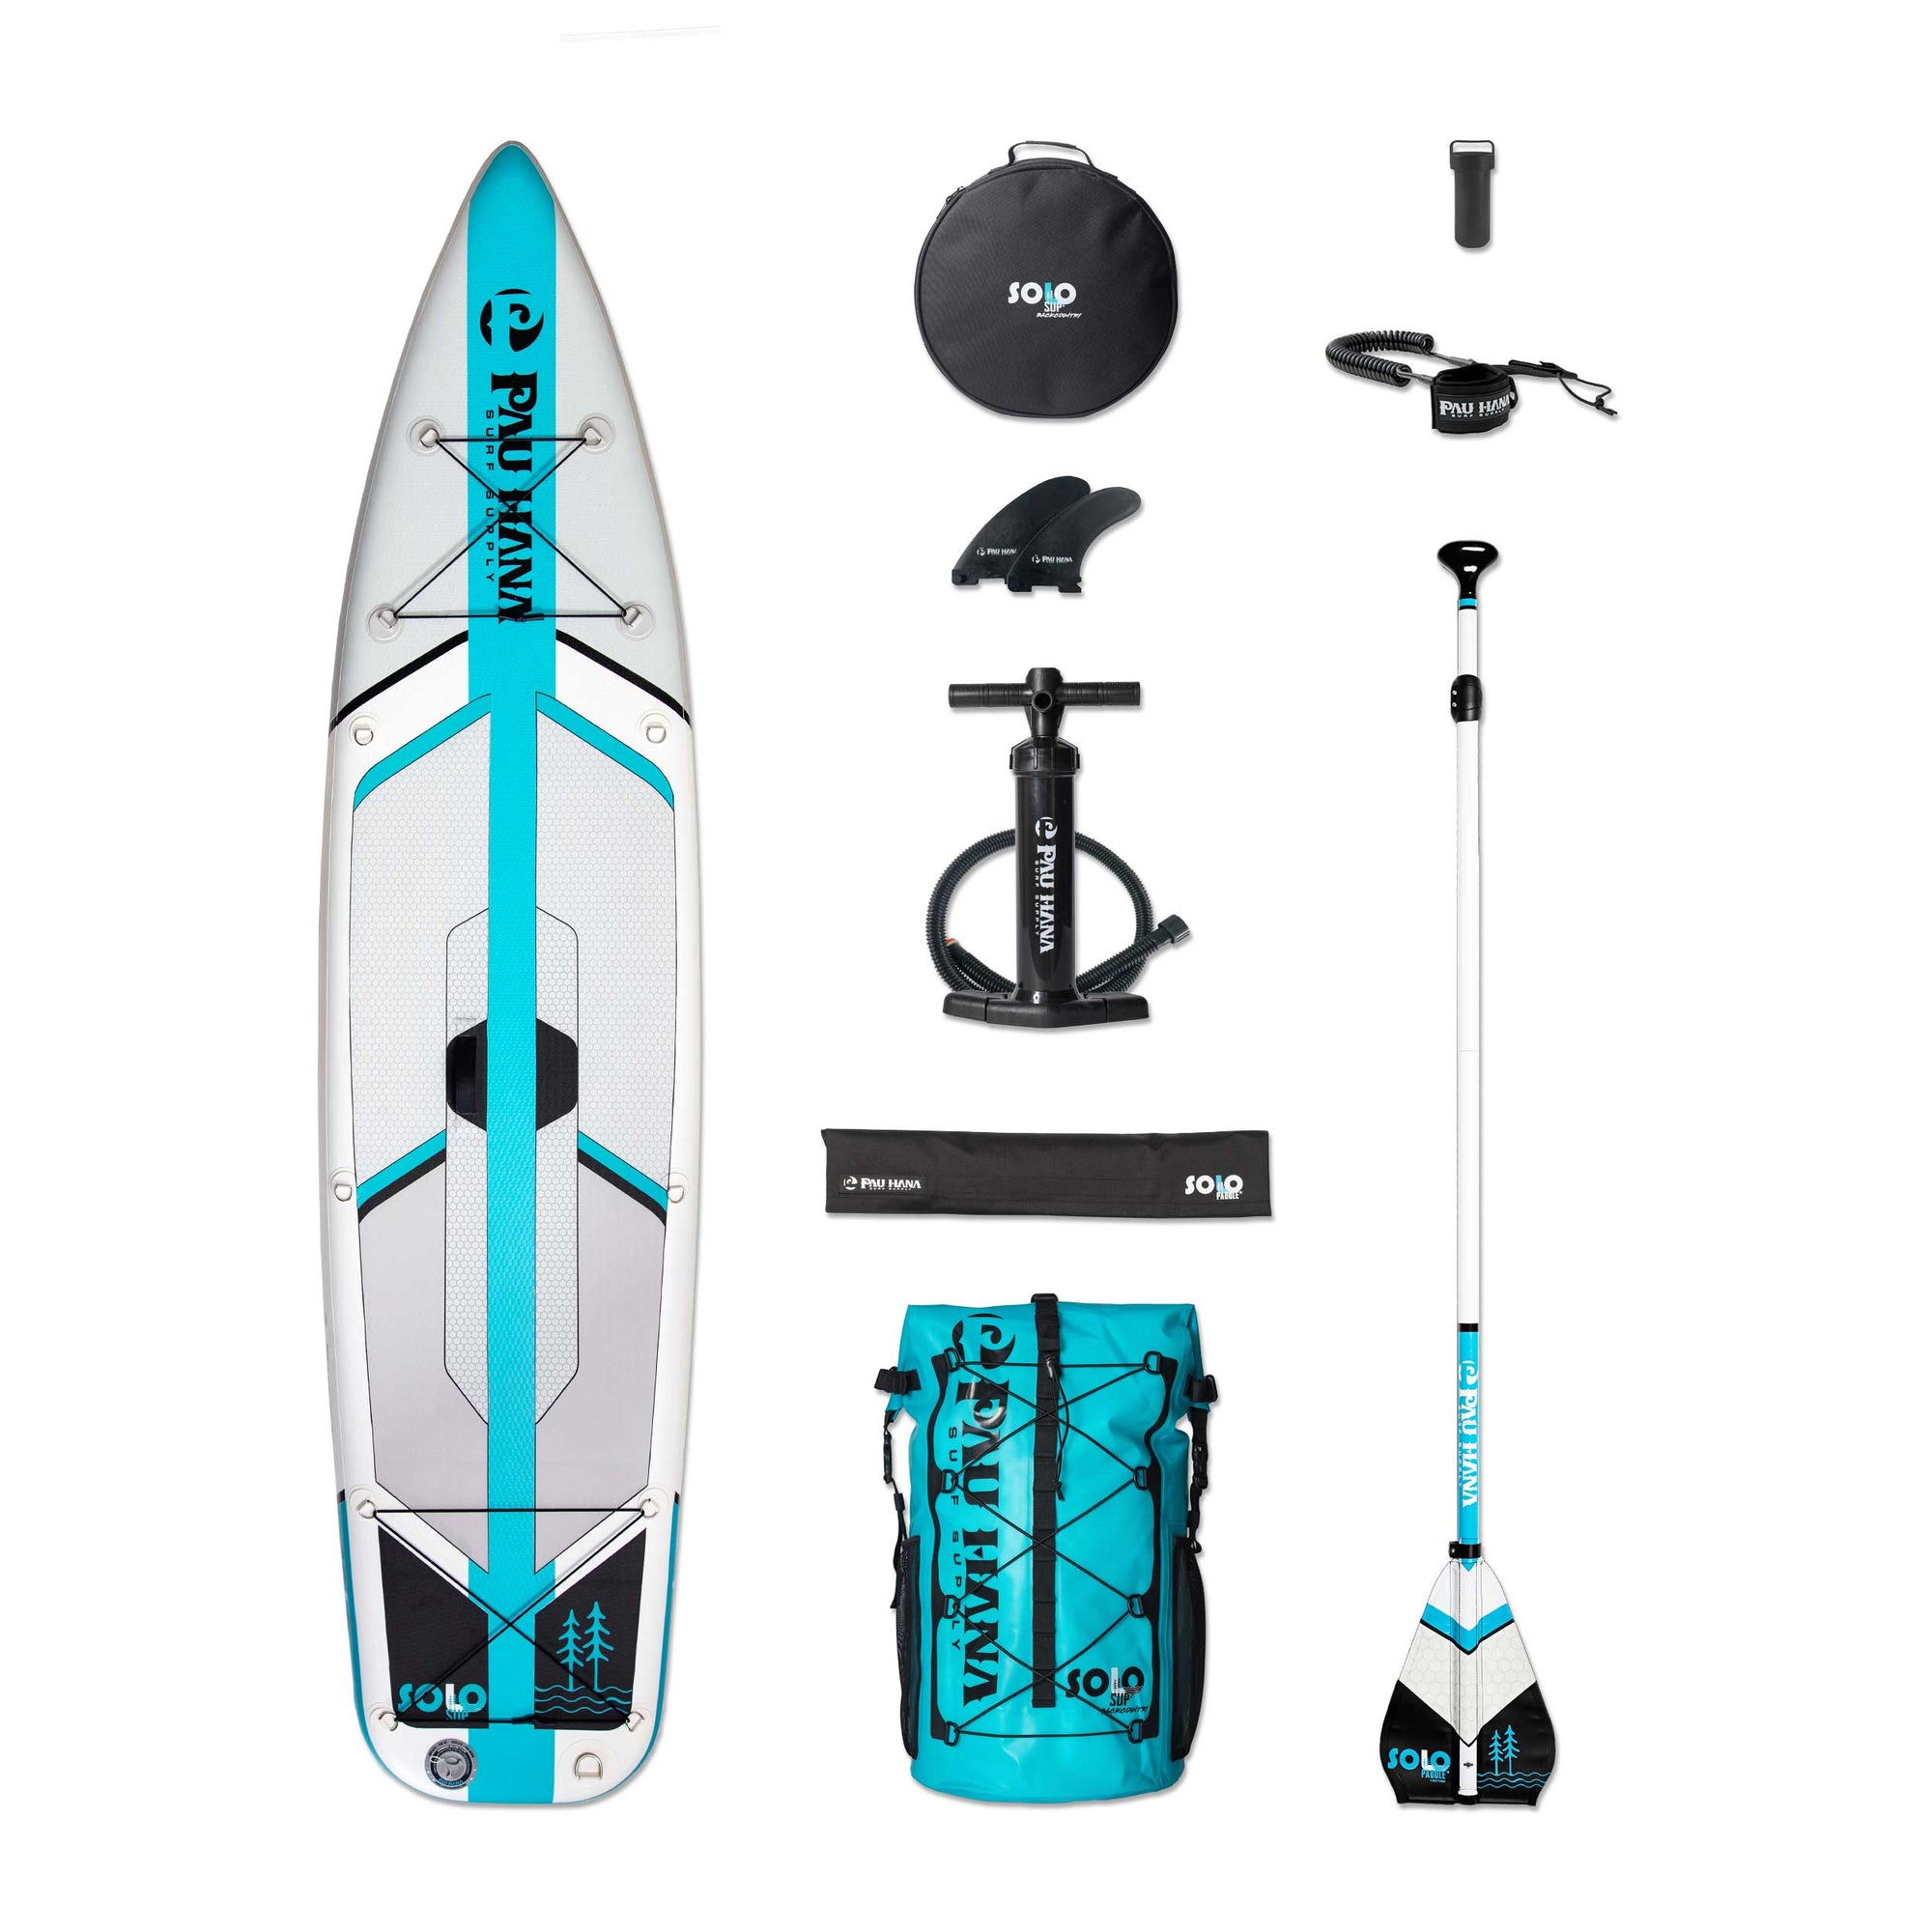 Solo SUP Backcountry paddleboard package